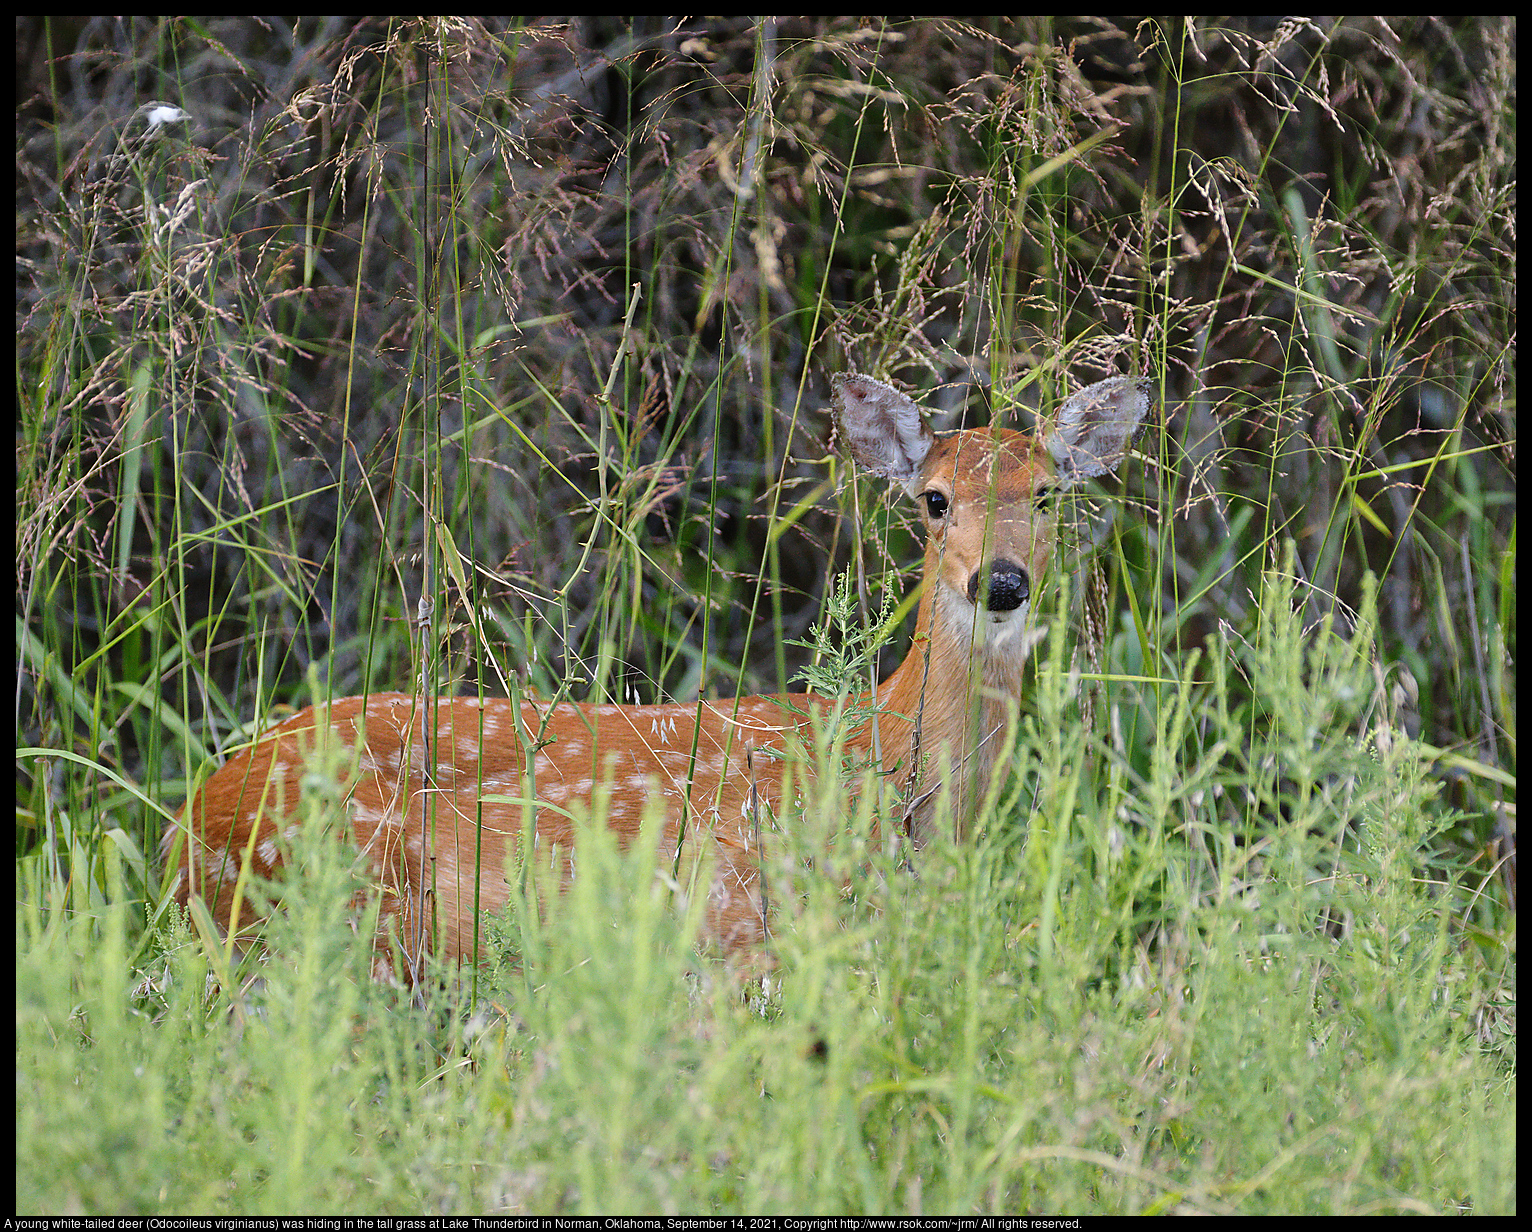 A young white-tailed deer (Odocoileus virginianus) was hiding in the tall grass at Lake Thunderbird in Norman, Oklahoma, September 14, 2021